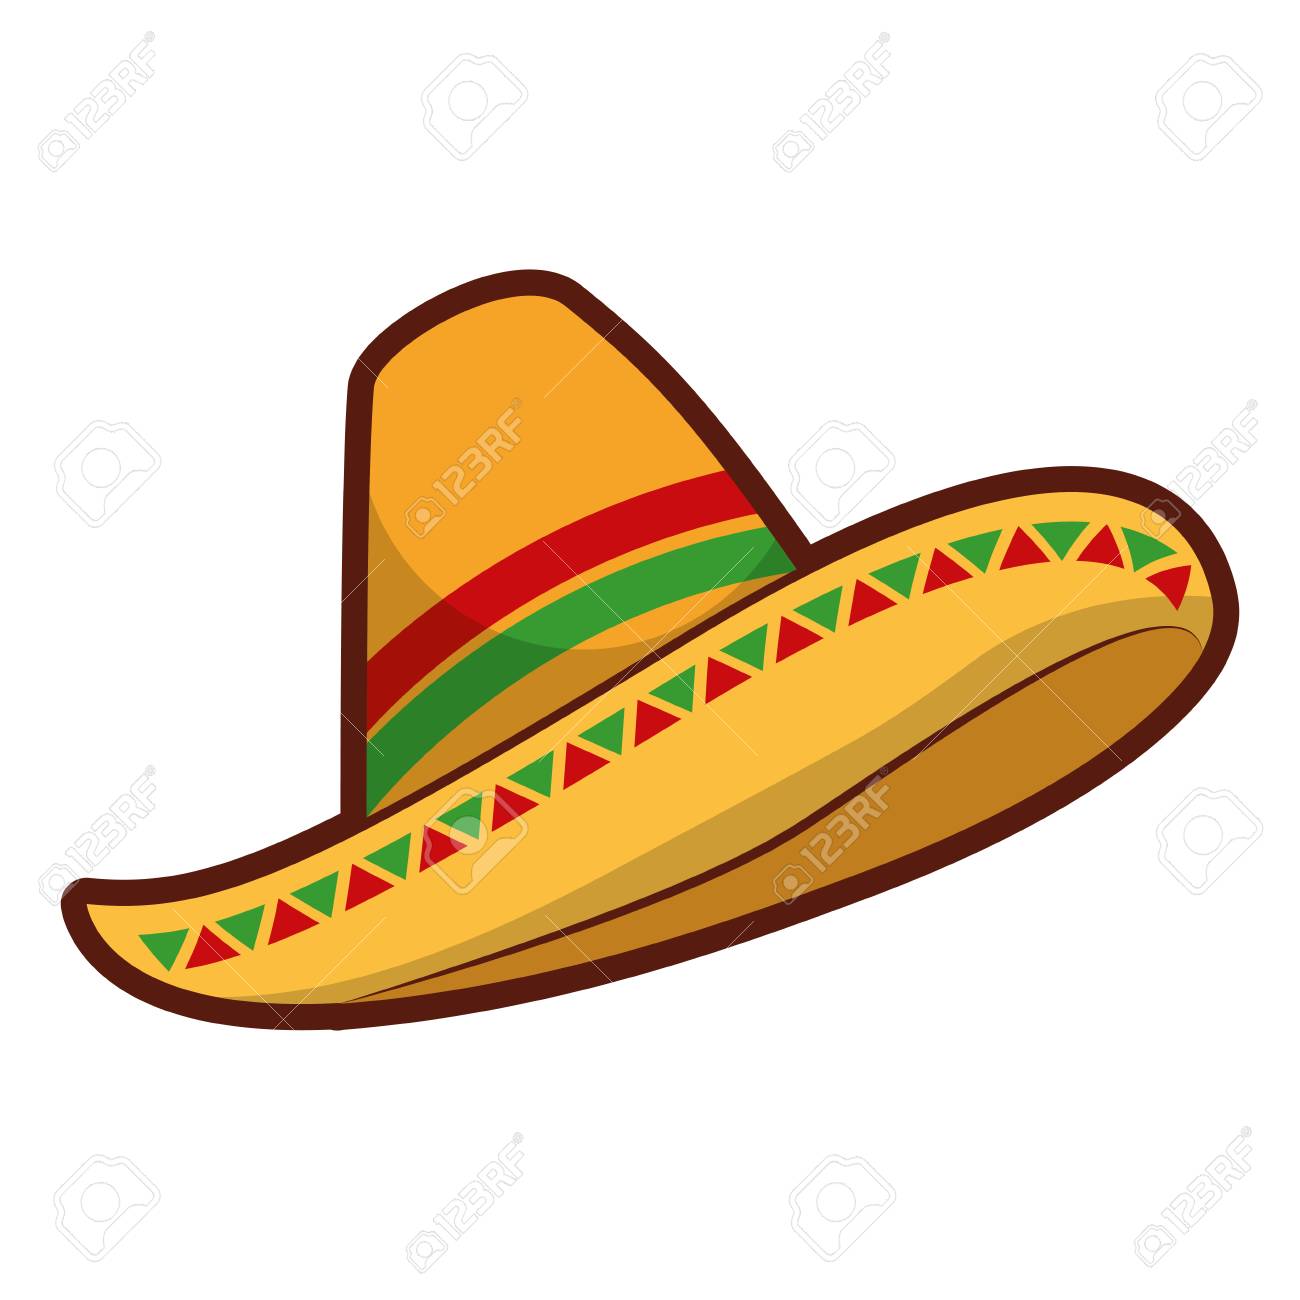 mexican hat isolated icon vector illustration design.